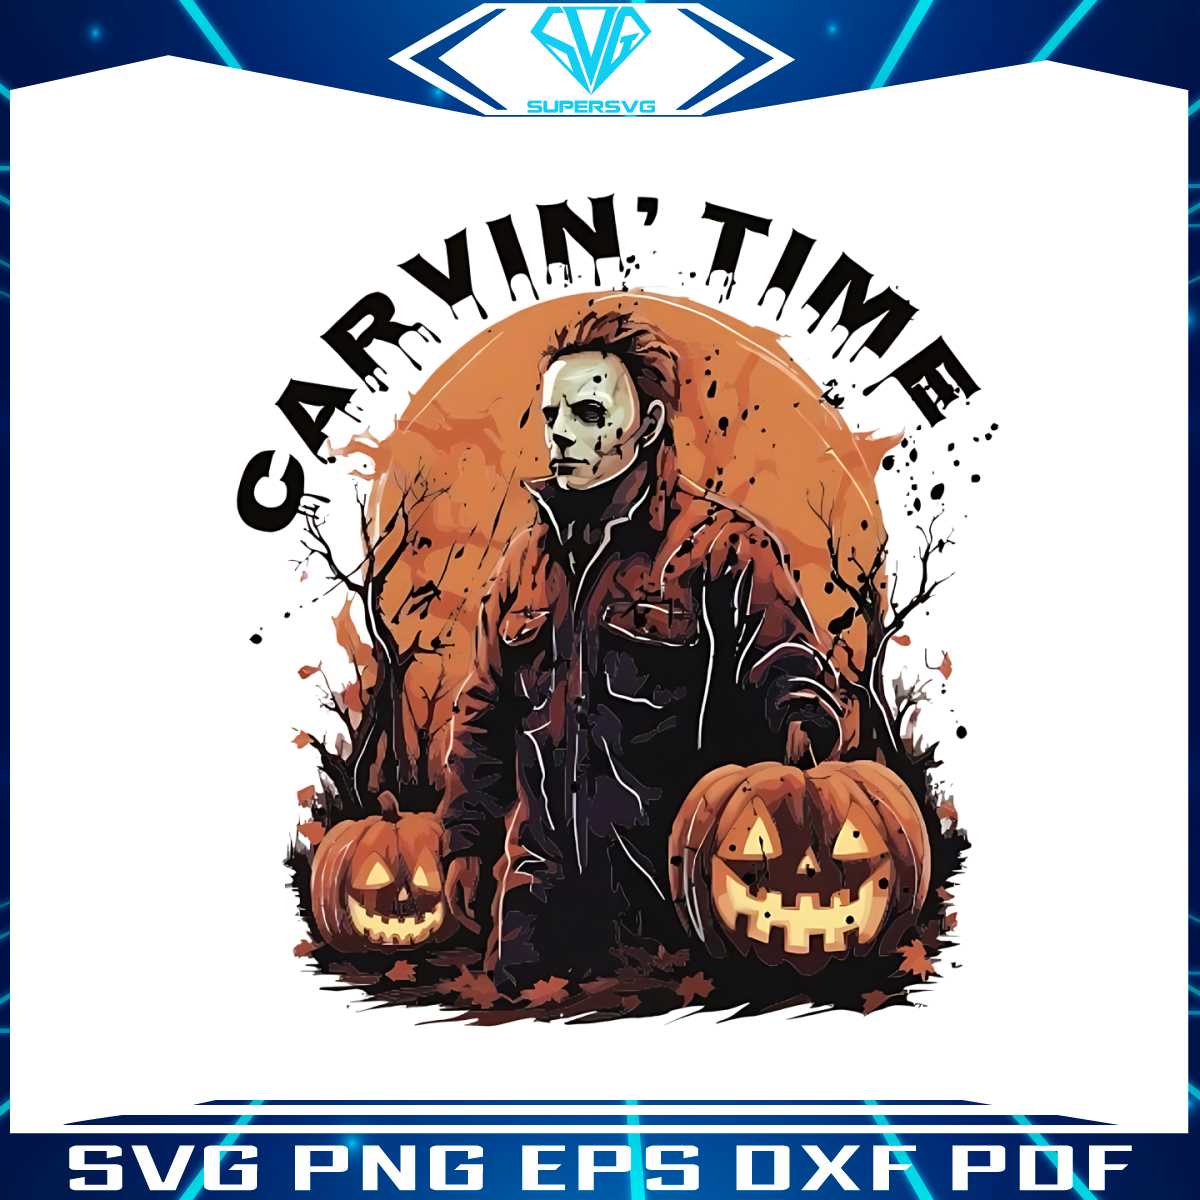 carvin-time-michael-myers-horror-halloween-png-download